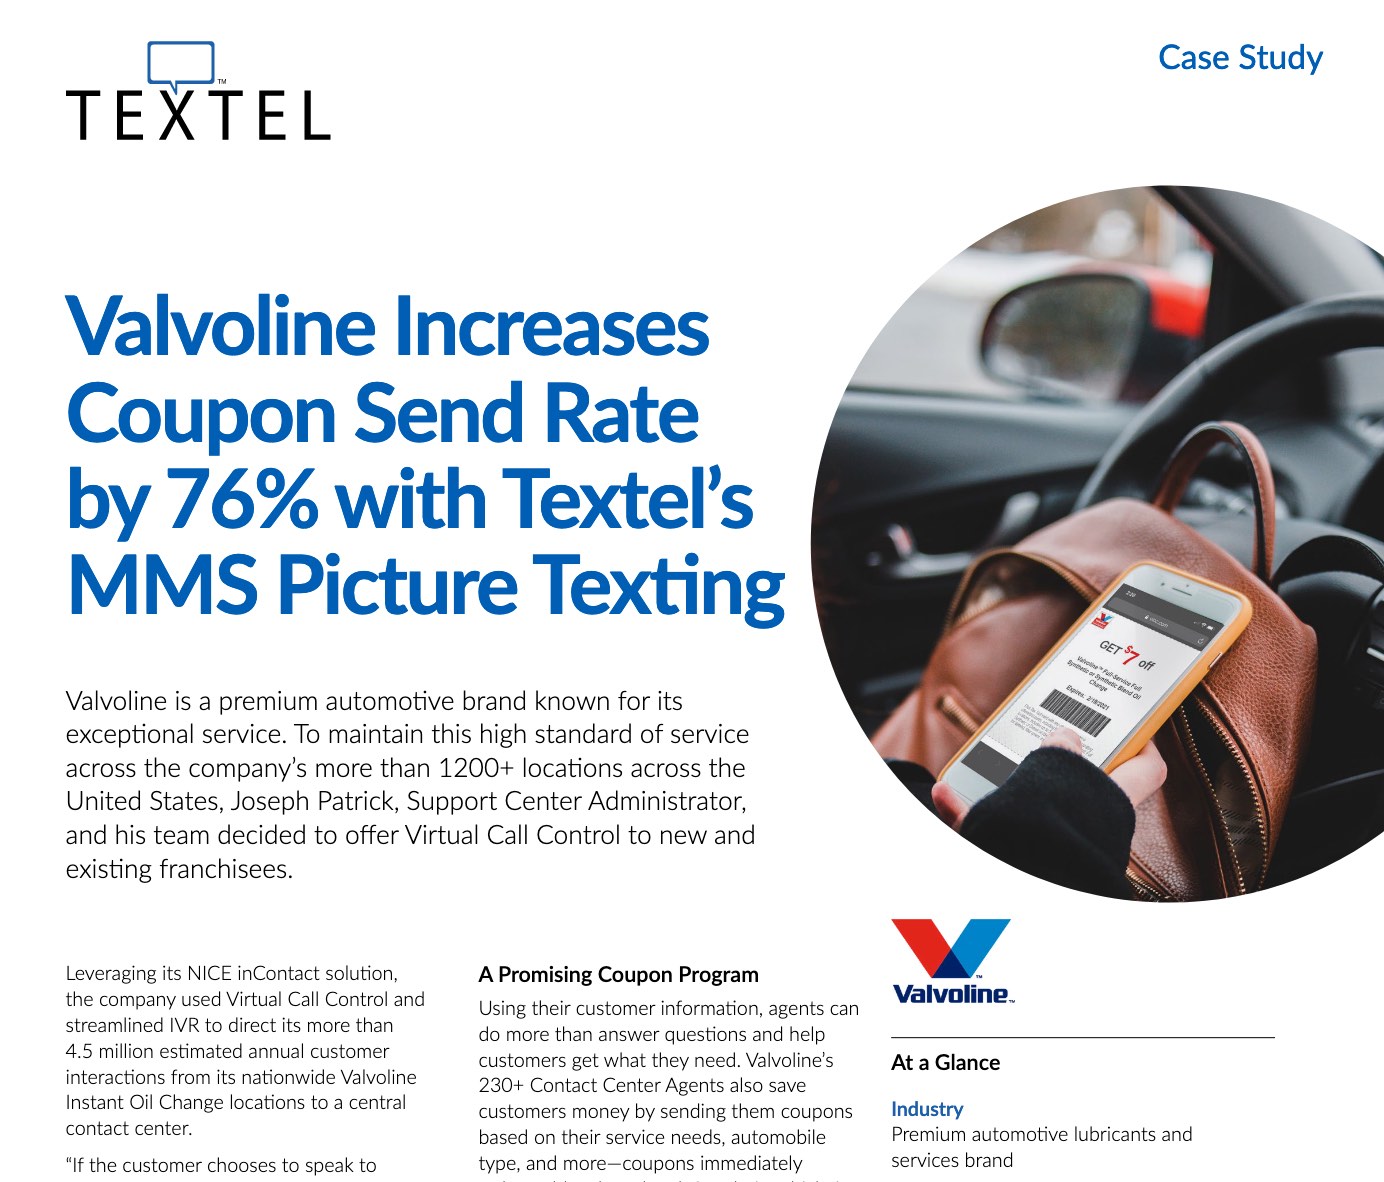 Textel's case study titled "Valvoline Increases Coupon Send Rate by 76% with Texel's MMS Picture Texting"